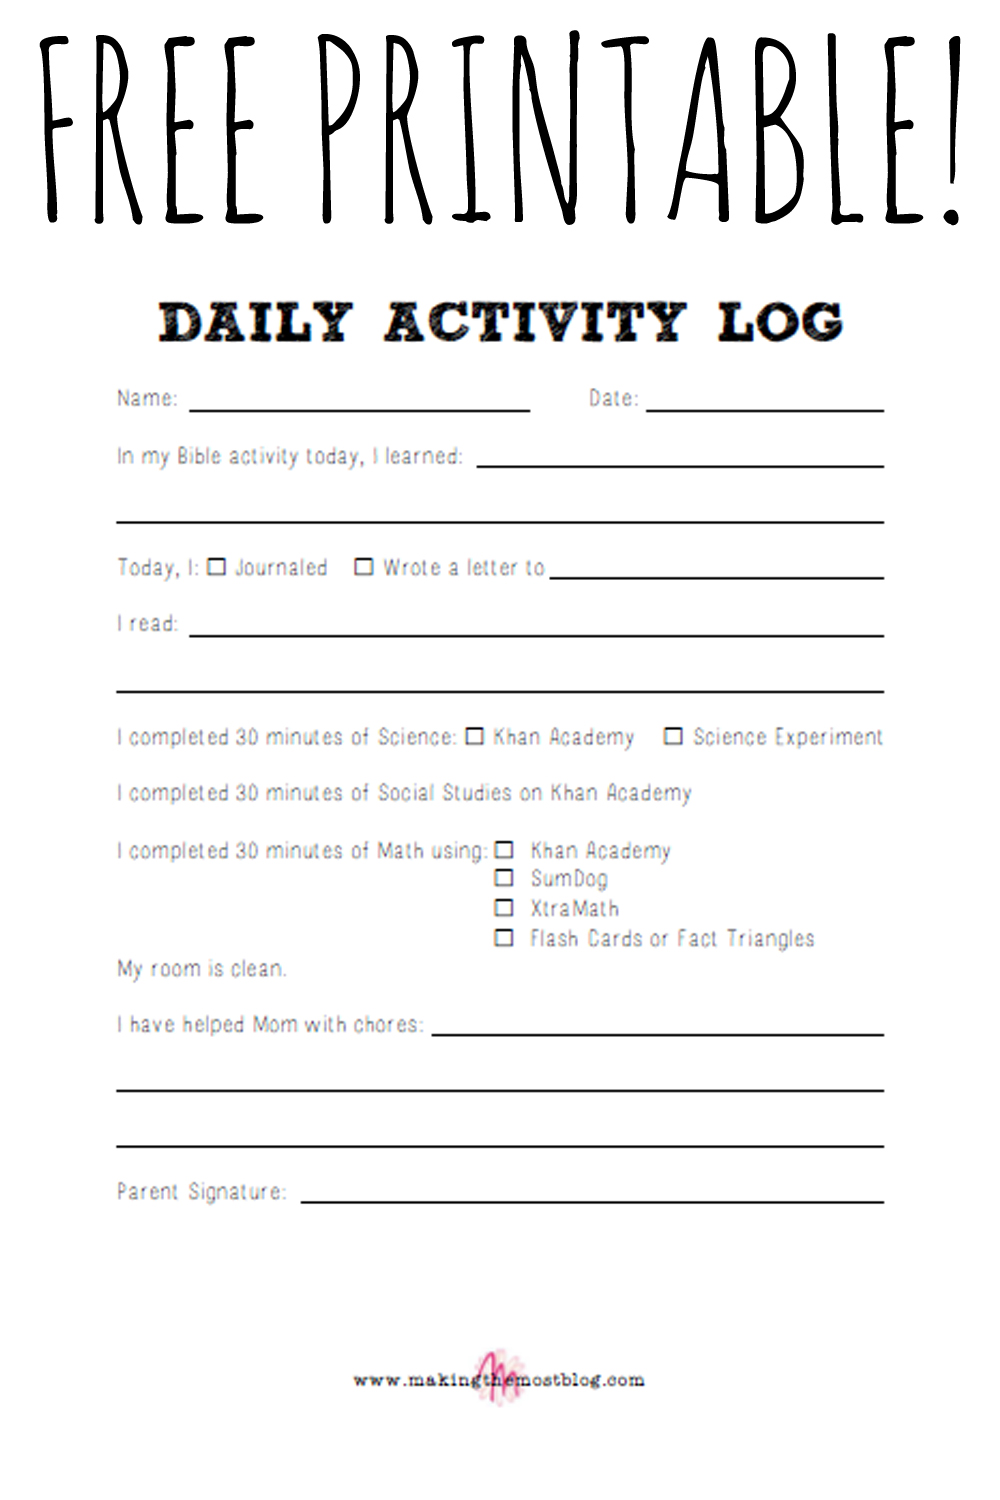 FREE! Printable Daily Activity Log | Making the Most Blog